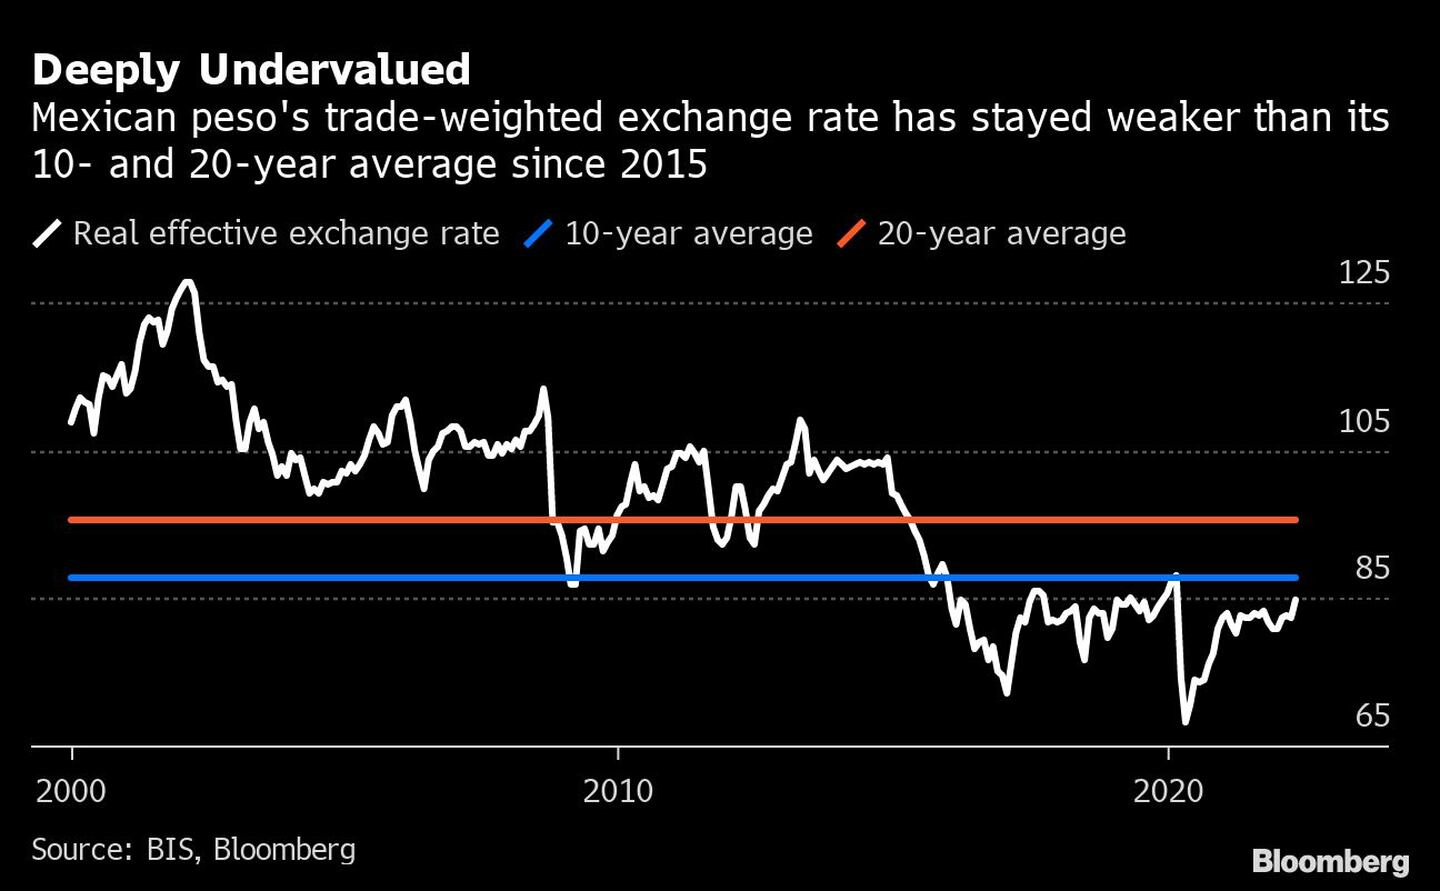 Deeply Undervalued  | Mexican peso's trade-weighted exchange rate has stayed weaker than its 10- and 20-year average since 2015dfd